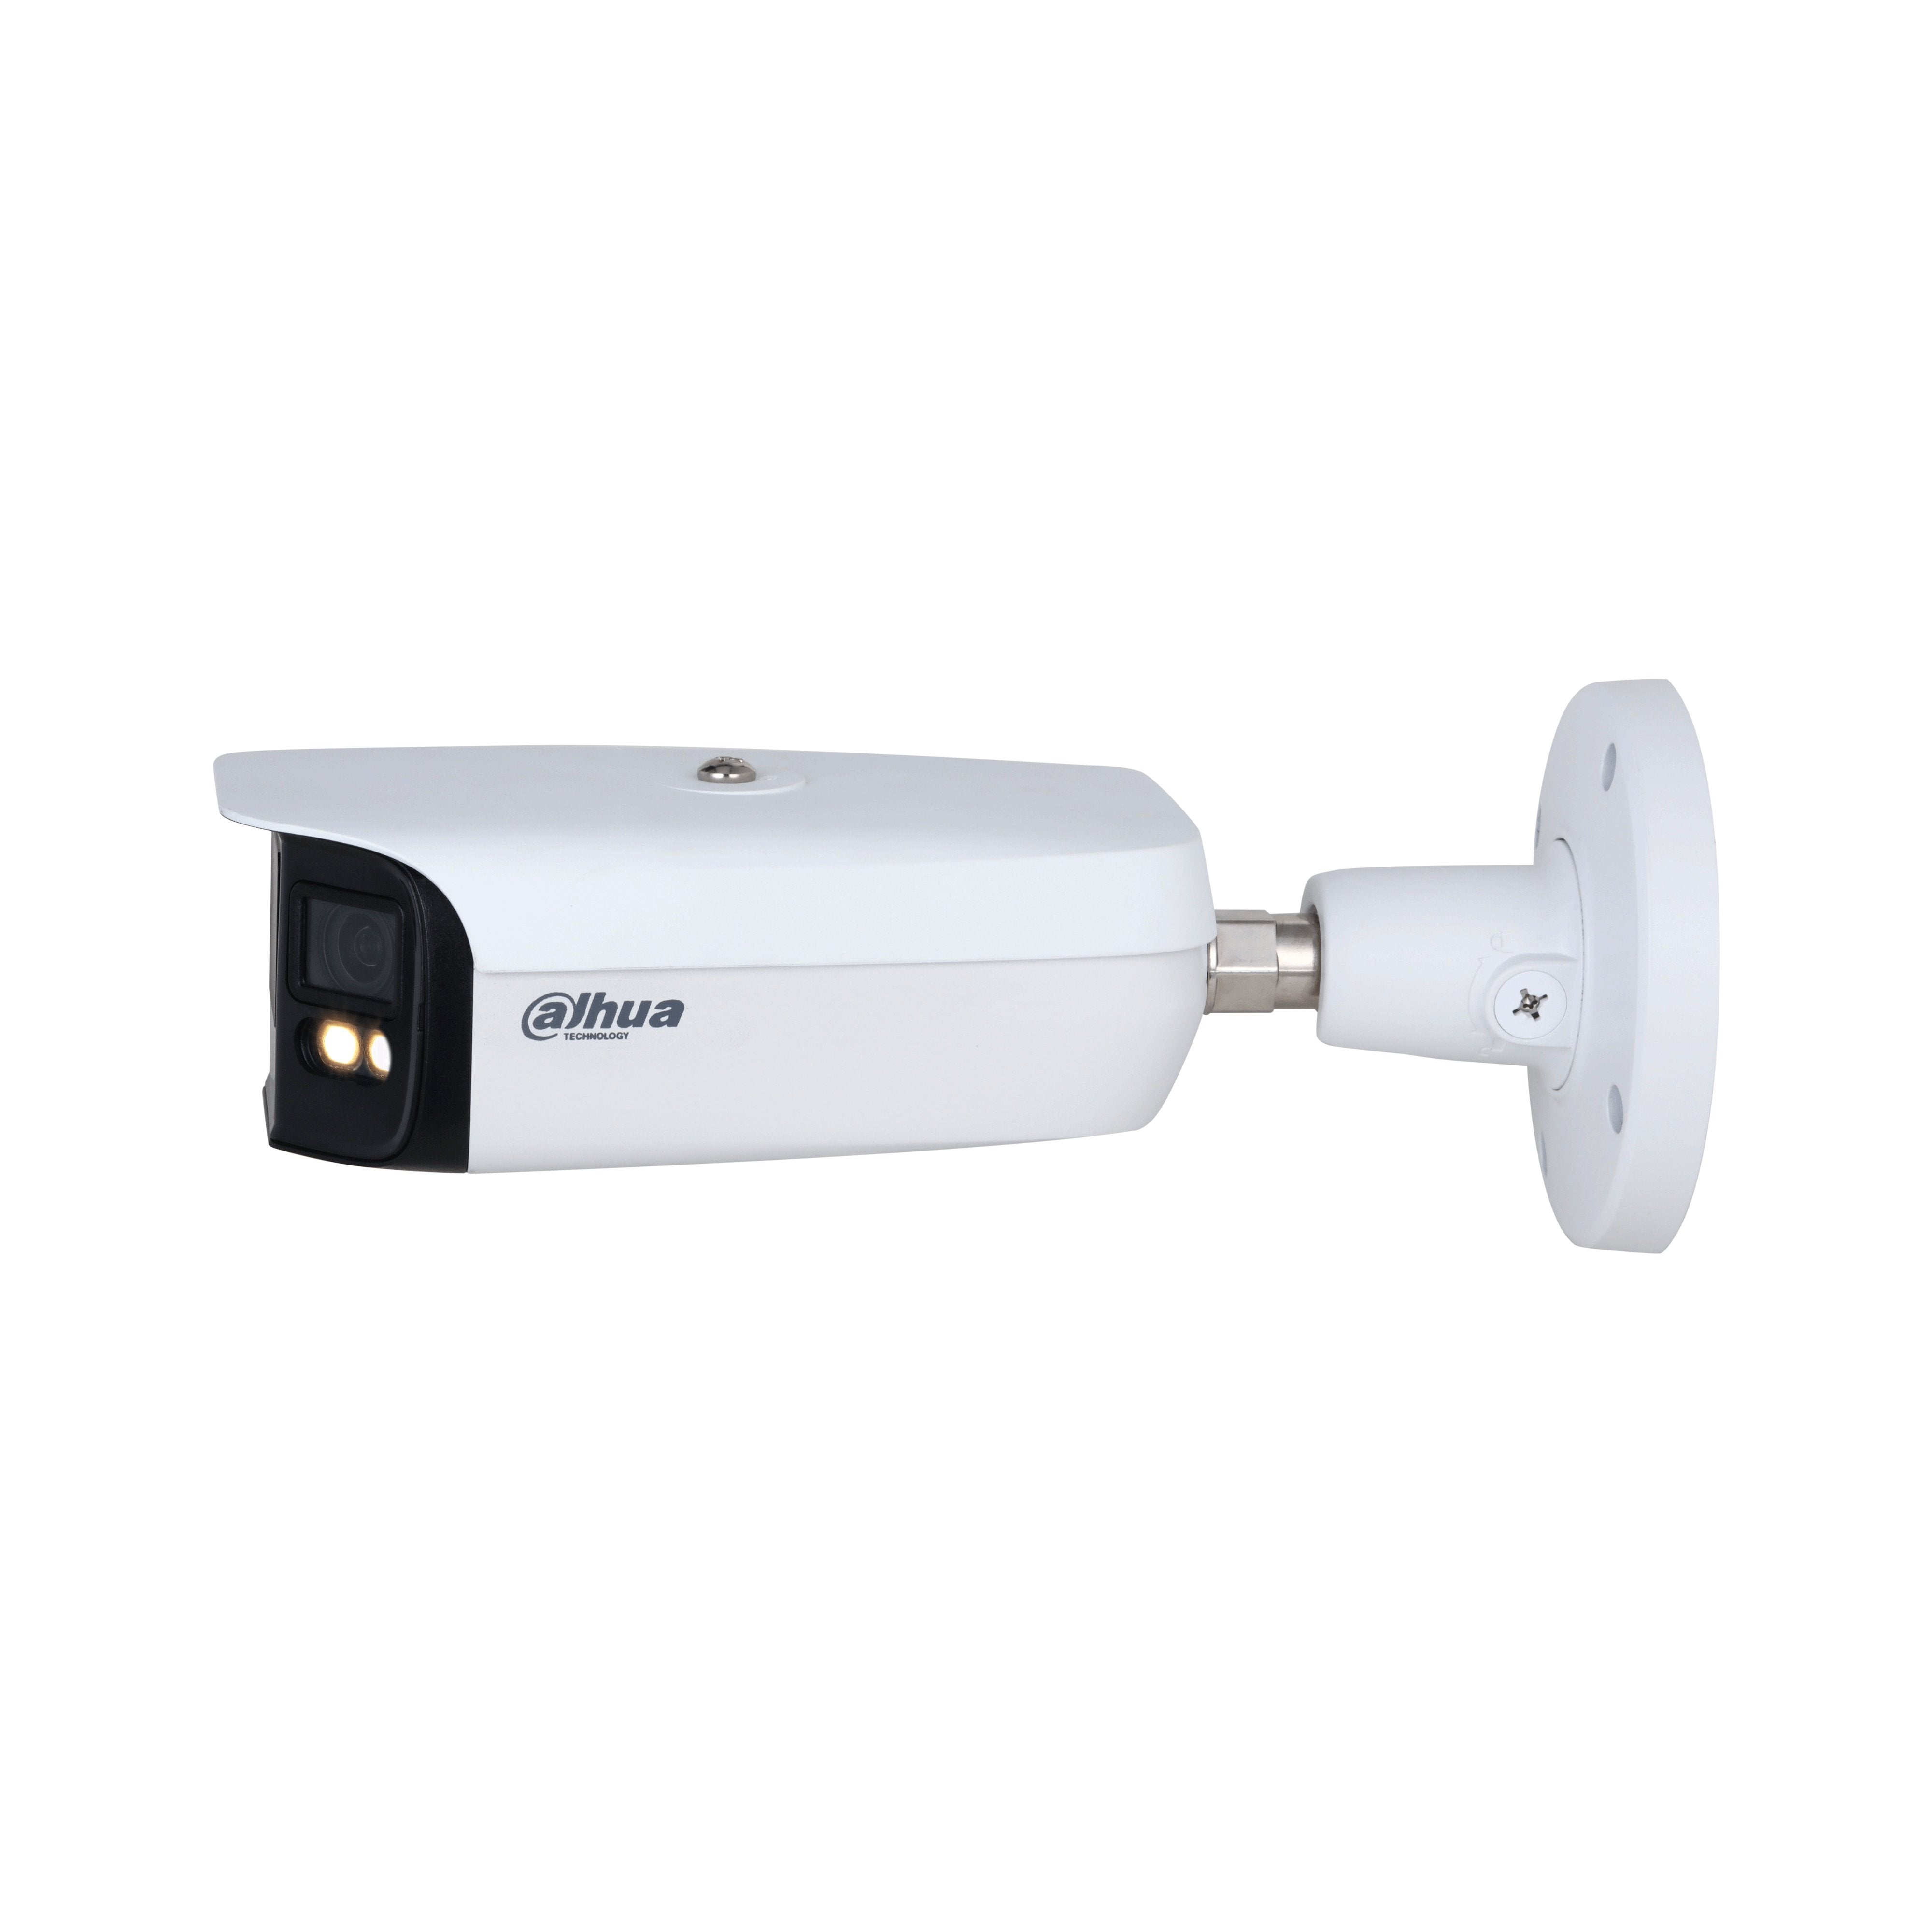 Dahua 8MP IP WizMind AI Series Full Colour 180 Degree Wide Angle Bullet Camera, SMD, People Counting, Perimeter, 140dB WDR, 40m White Light, ePOE / 12VDC, IP67, MicroSD, Built-in Mic / Speaker, EPTZ (Junction Box: PFA5300R)